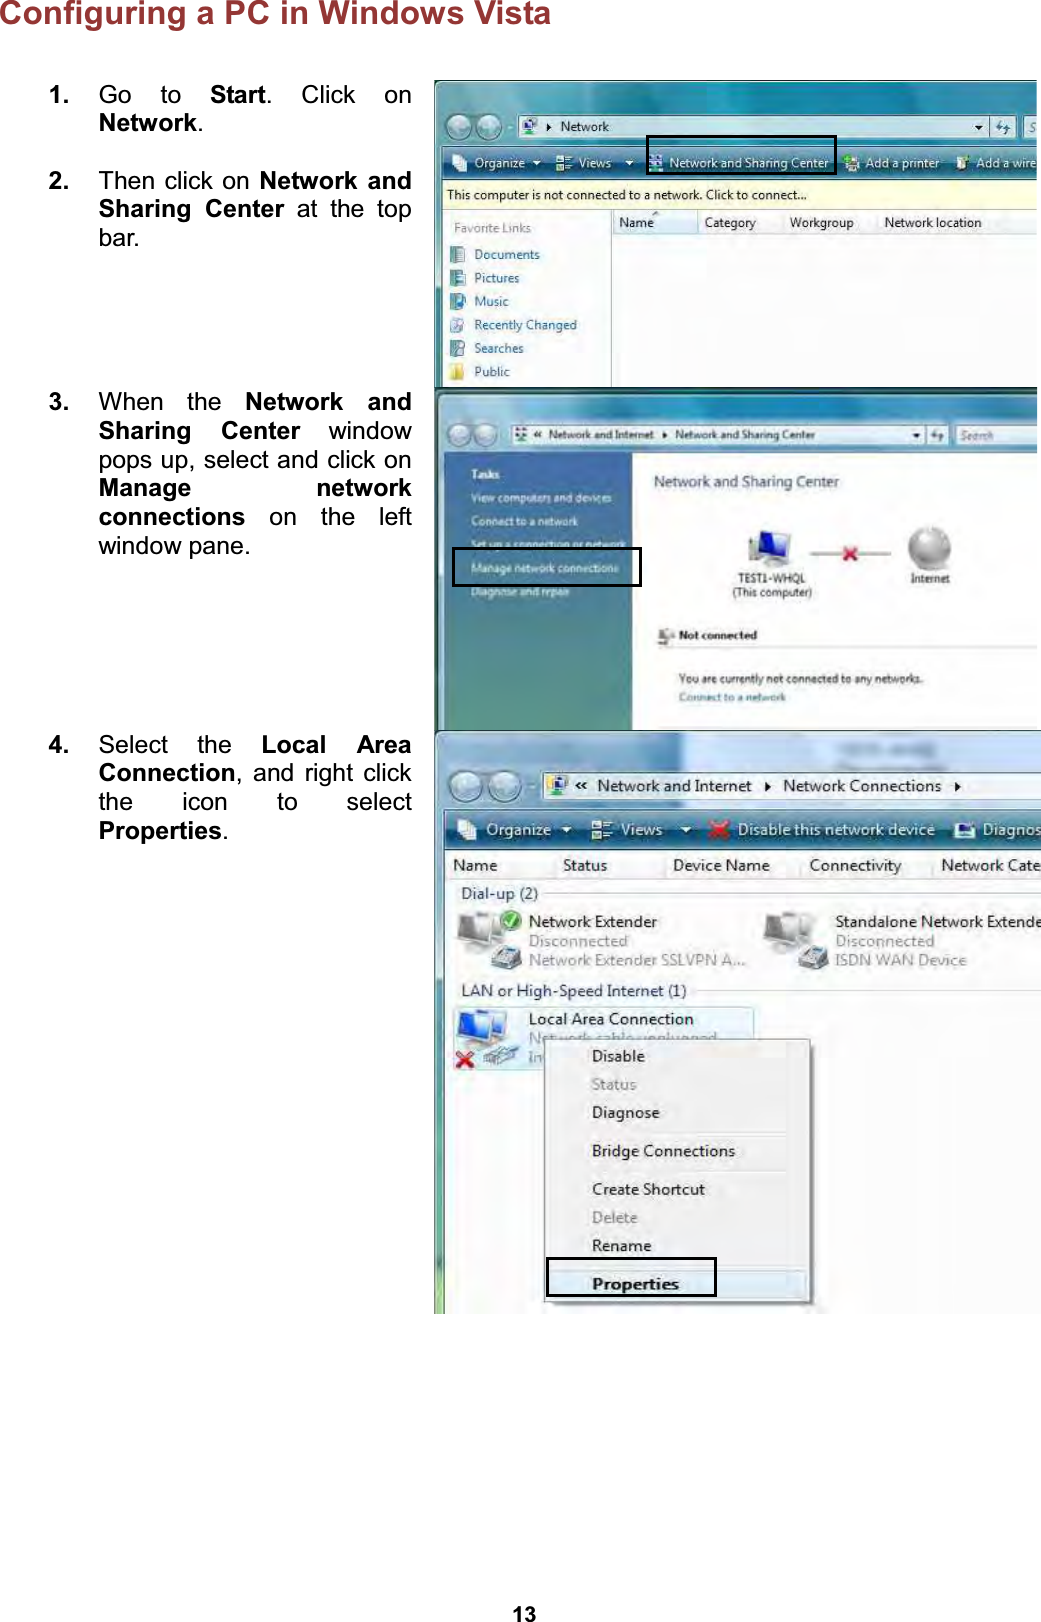  13 Configuring a PC in Windows Vista      1.  Go to Start. Click on Network.  2.  Then click on Network and Sharing Center at the top bar.  3.  When the Network and Sharing Center window pops up, select and click on Manage network connections on the left window pane.  4.  Select the Local Area Connection, and right click the icon to select Properties.  